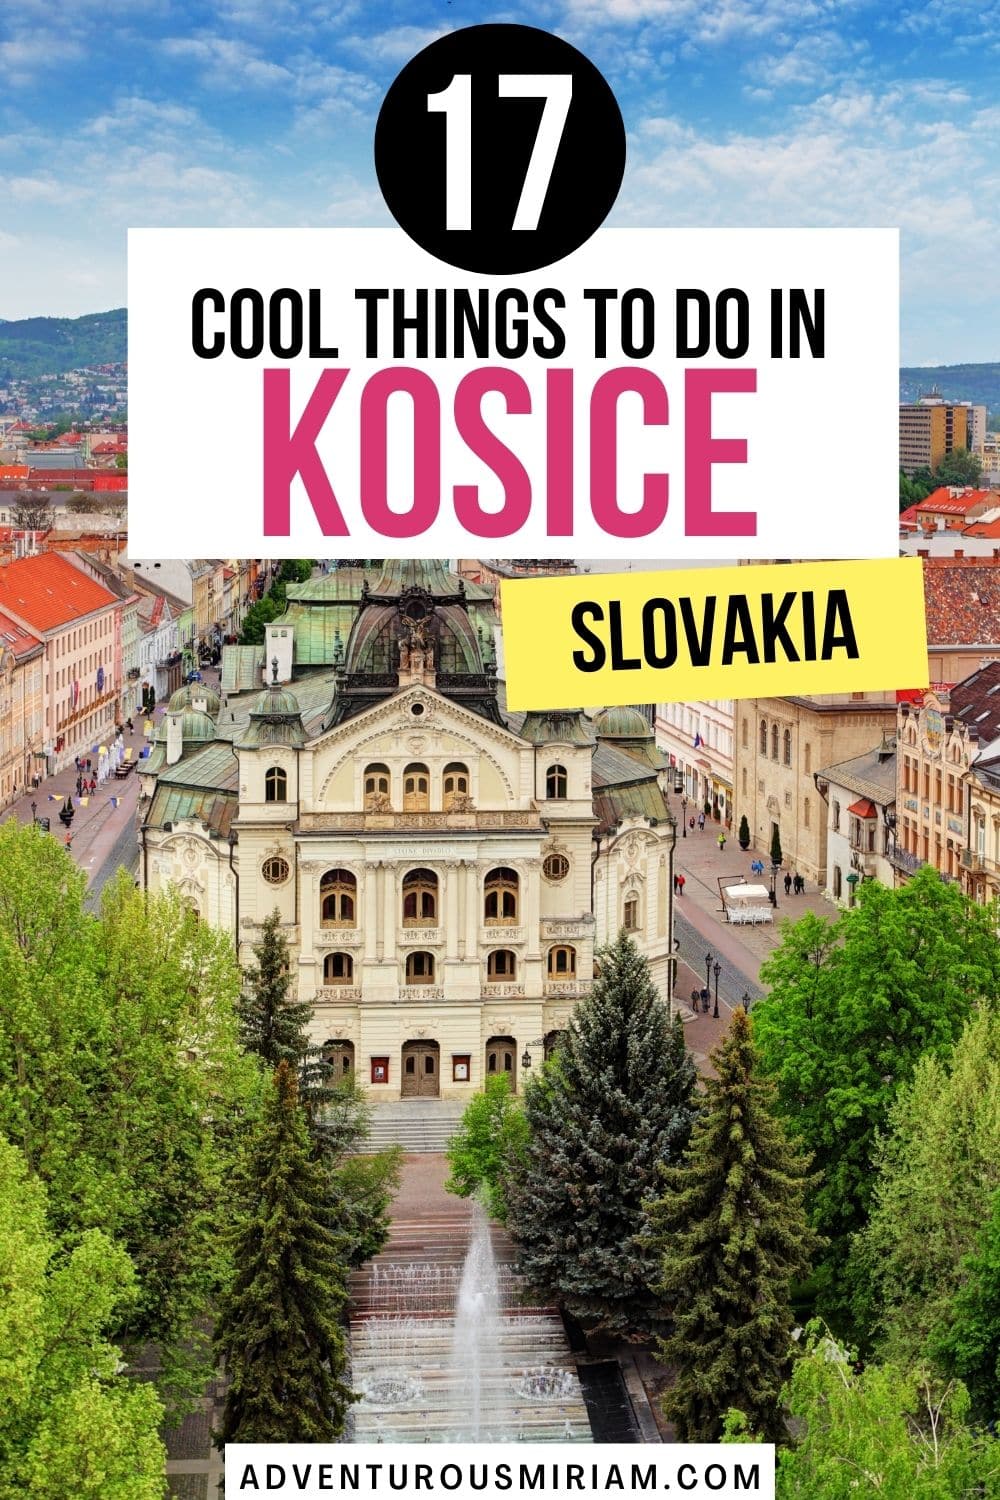 Košice is one of the most underrated cities and hidden gems in Europe. It's the second largest city in Slovakia, and in 2013 it was the European Capital of Culture. It’s still fairly small and easy to get around though, especially if you’re staying in Košice center near the pedestrian street. Here's a list of all the amazing things to do in Kosice, Slovakia. Kosice slovakia travel. Kosice slovakia photography. Visit kosice. Europe travel